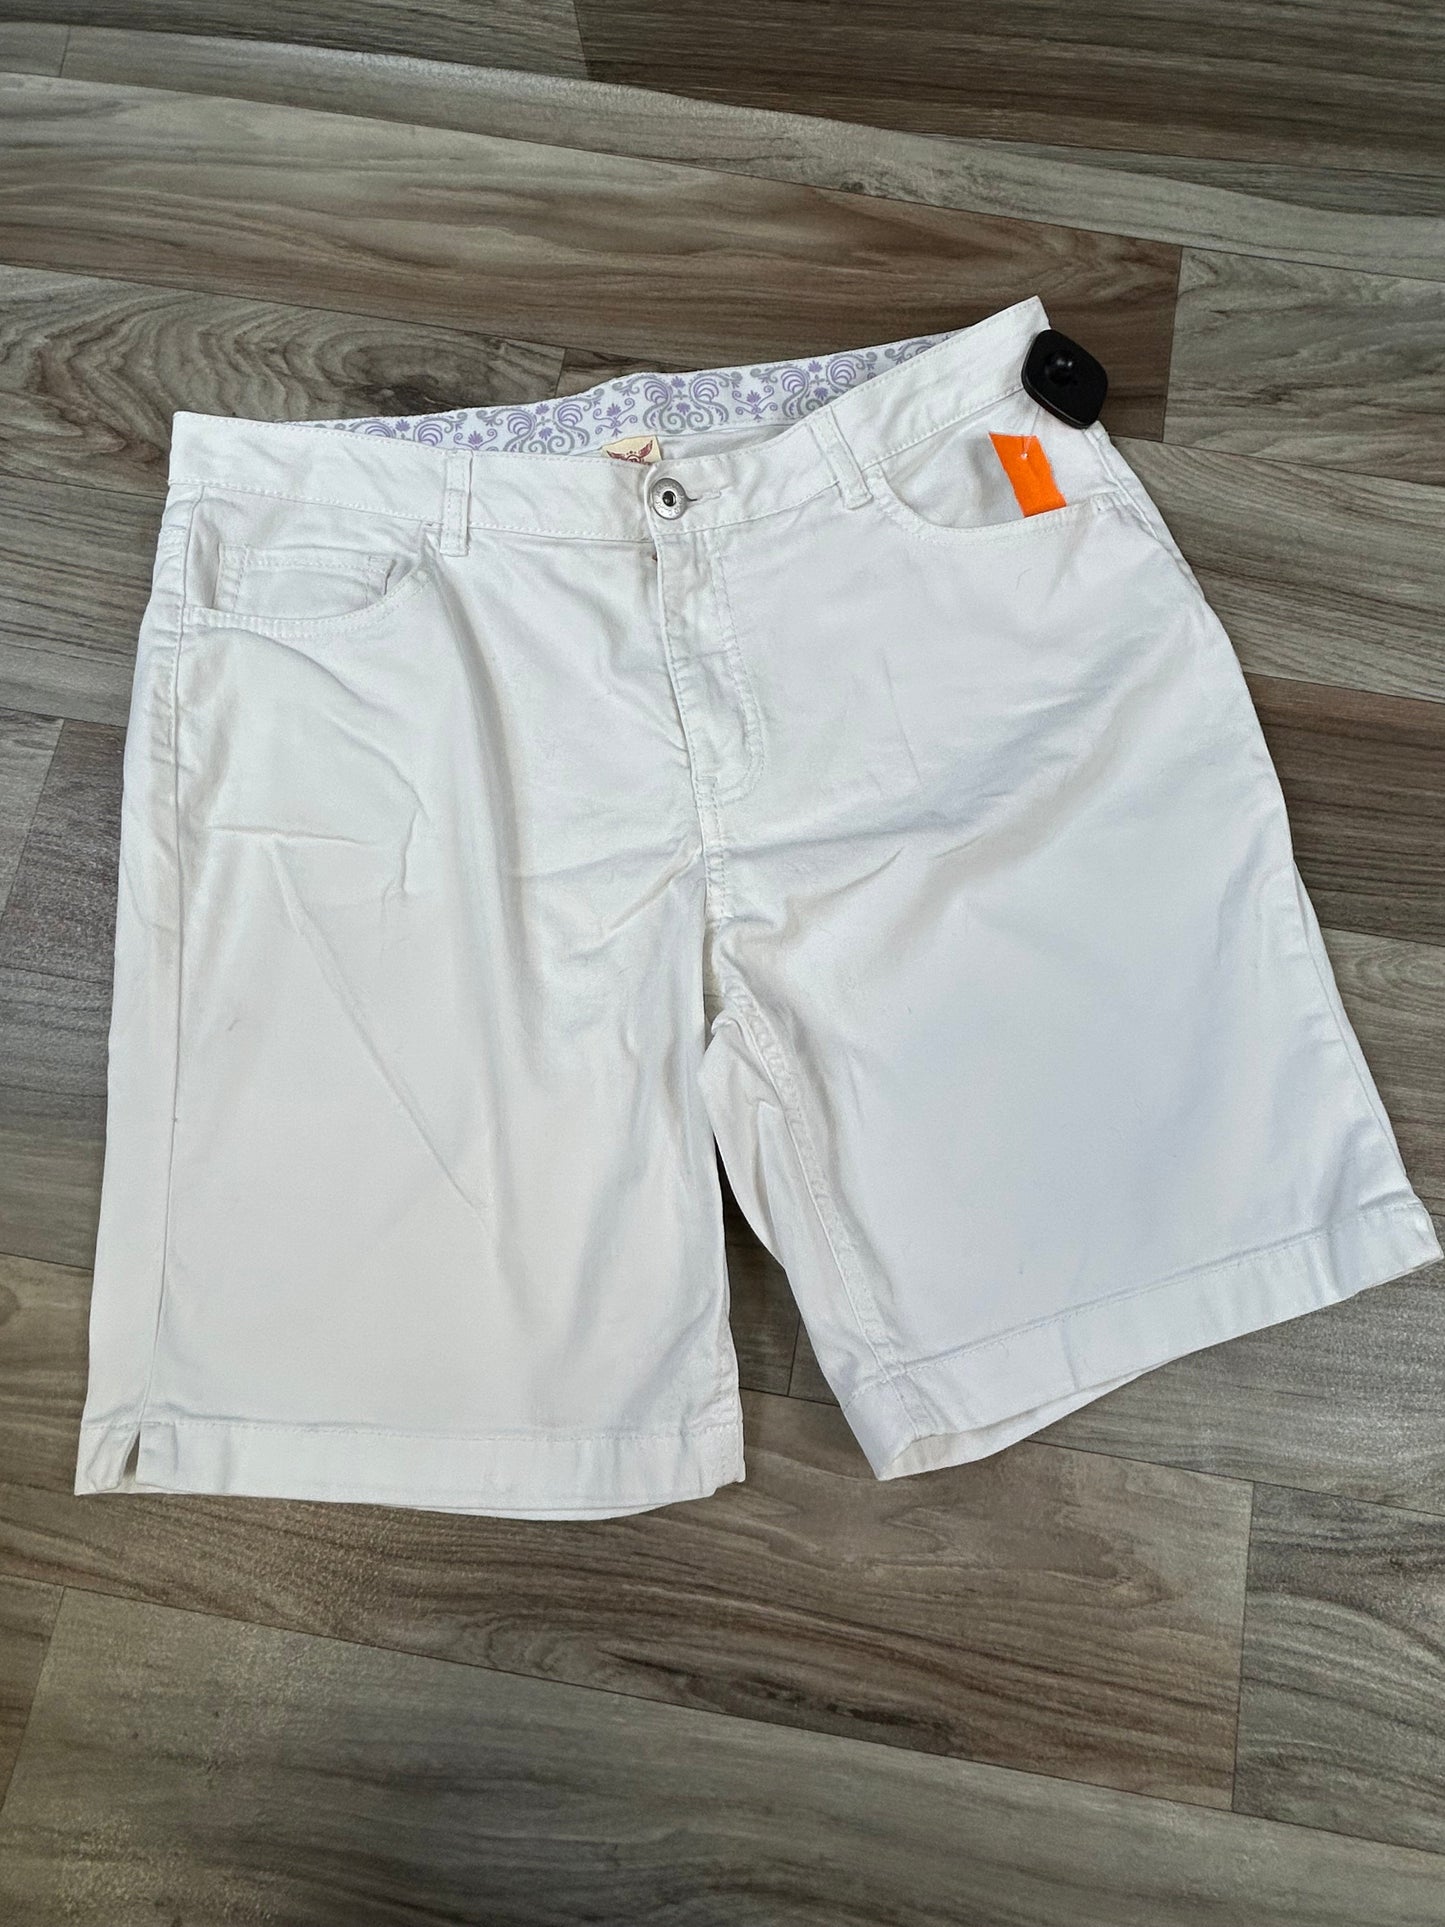 Shorts By Faded Glory  Size: 16w